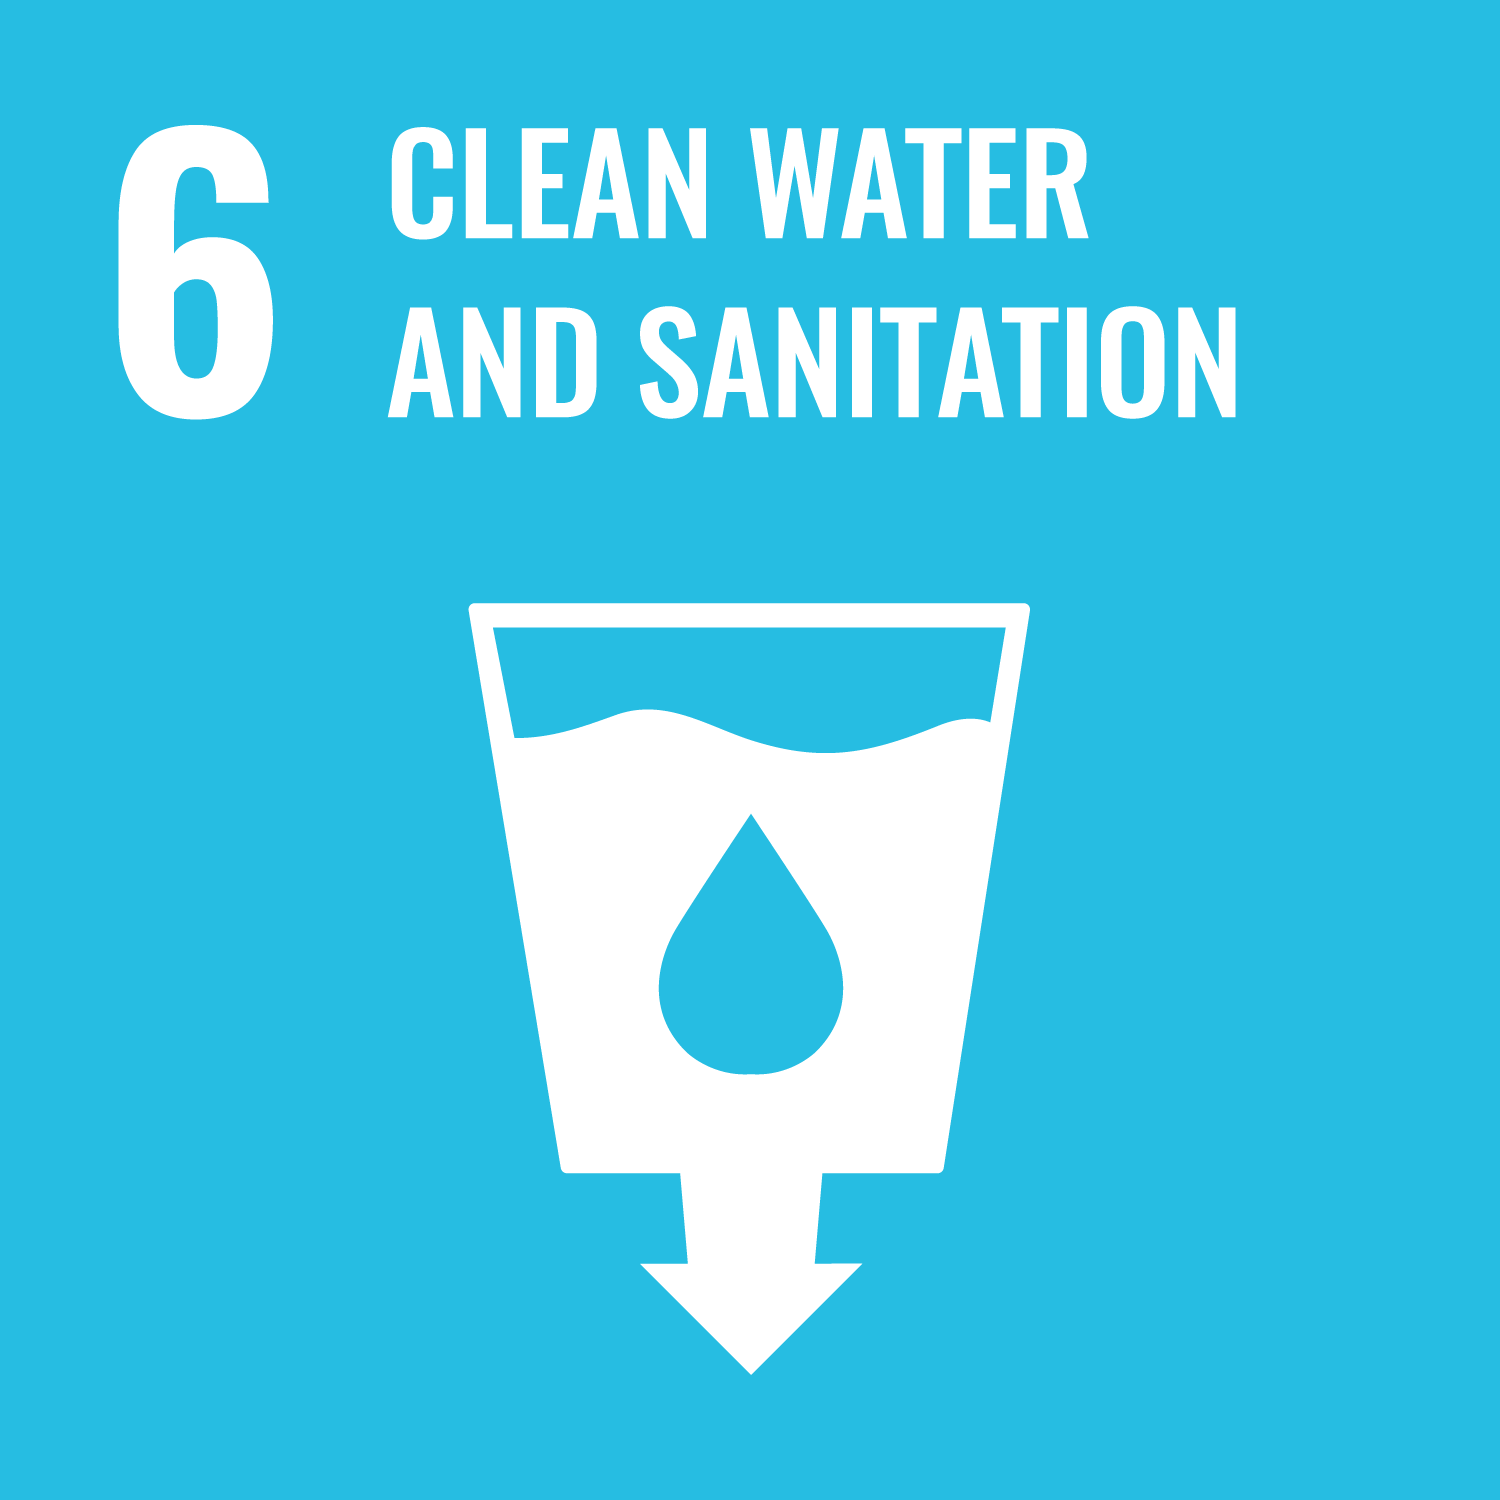 UNSDG-6 - Clean water and Sanitation